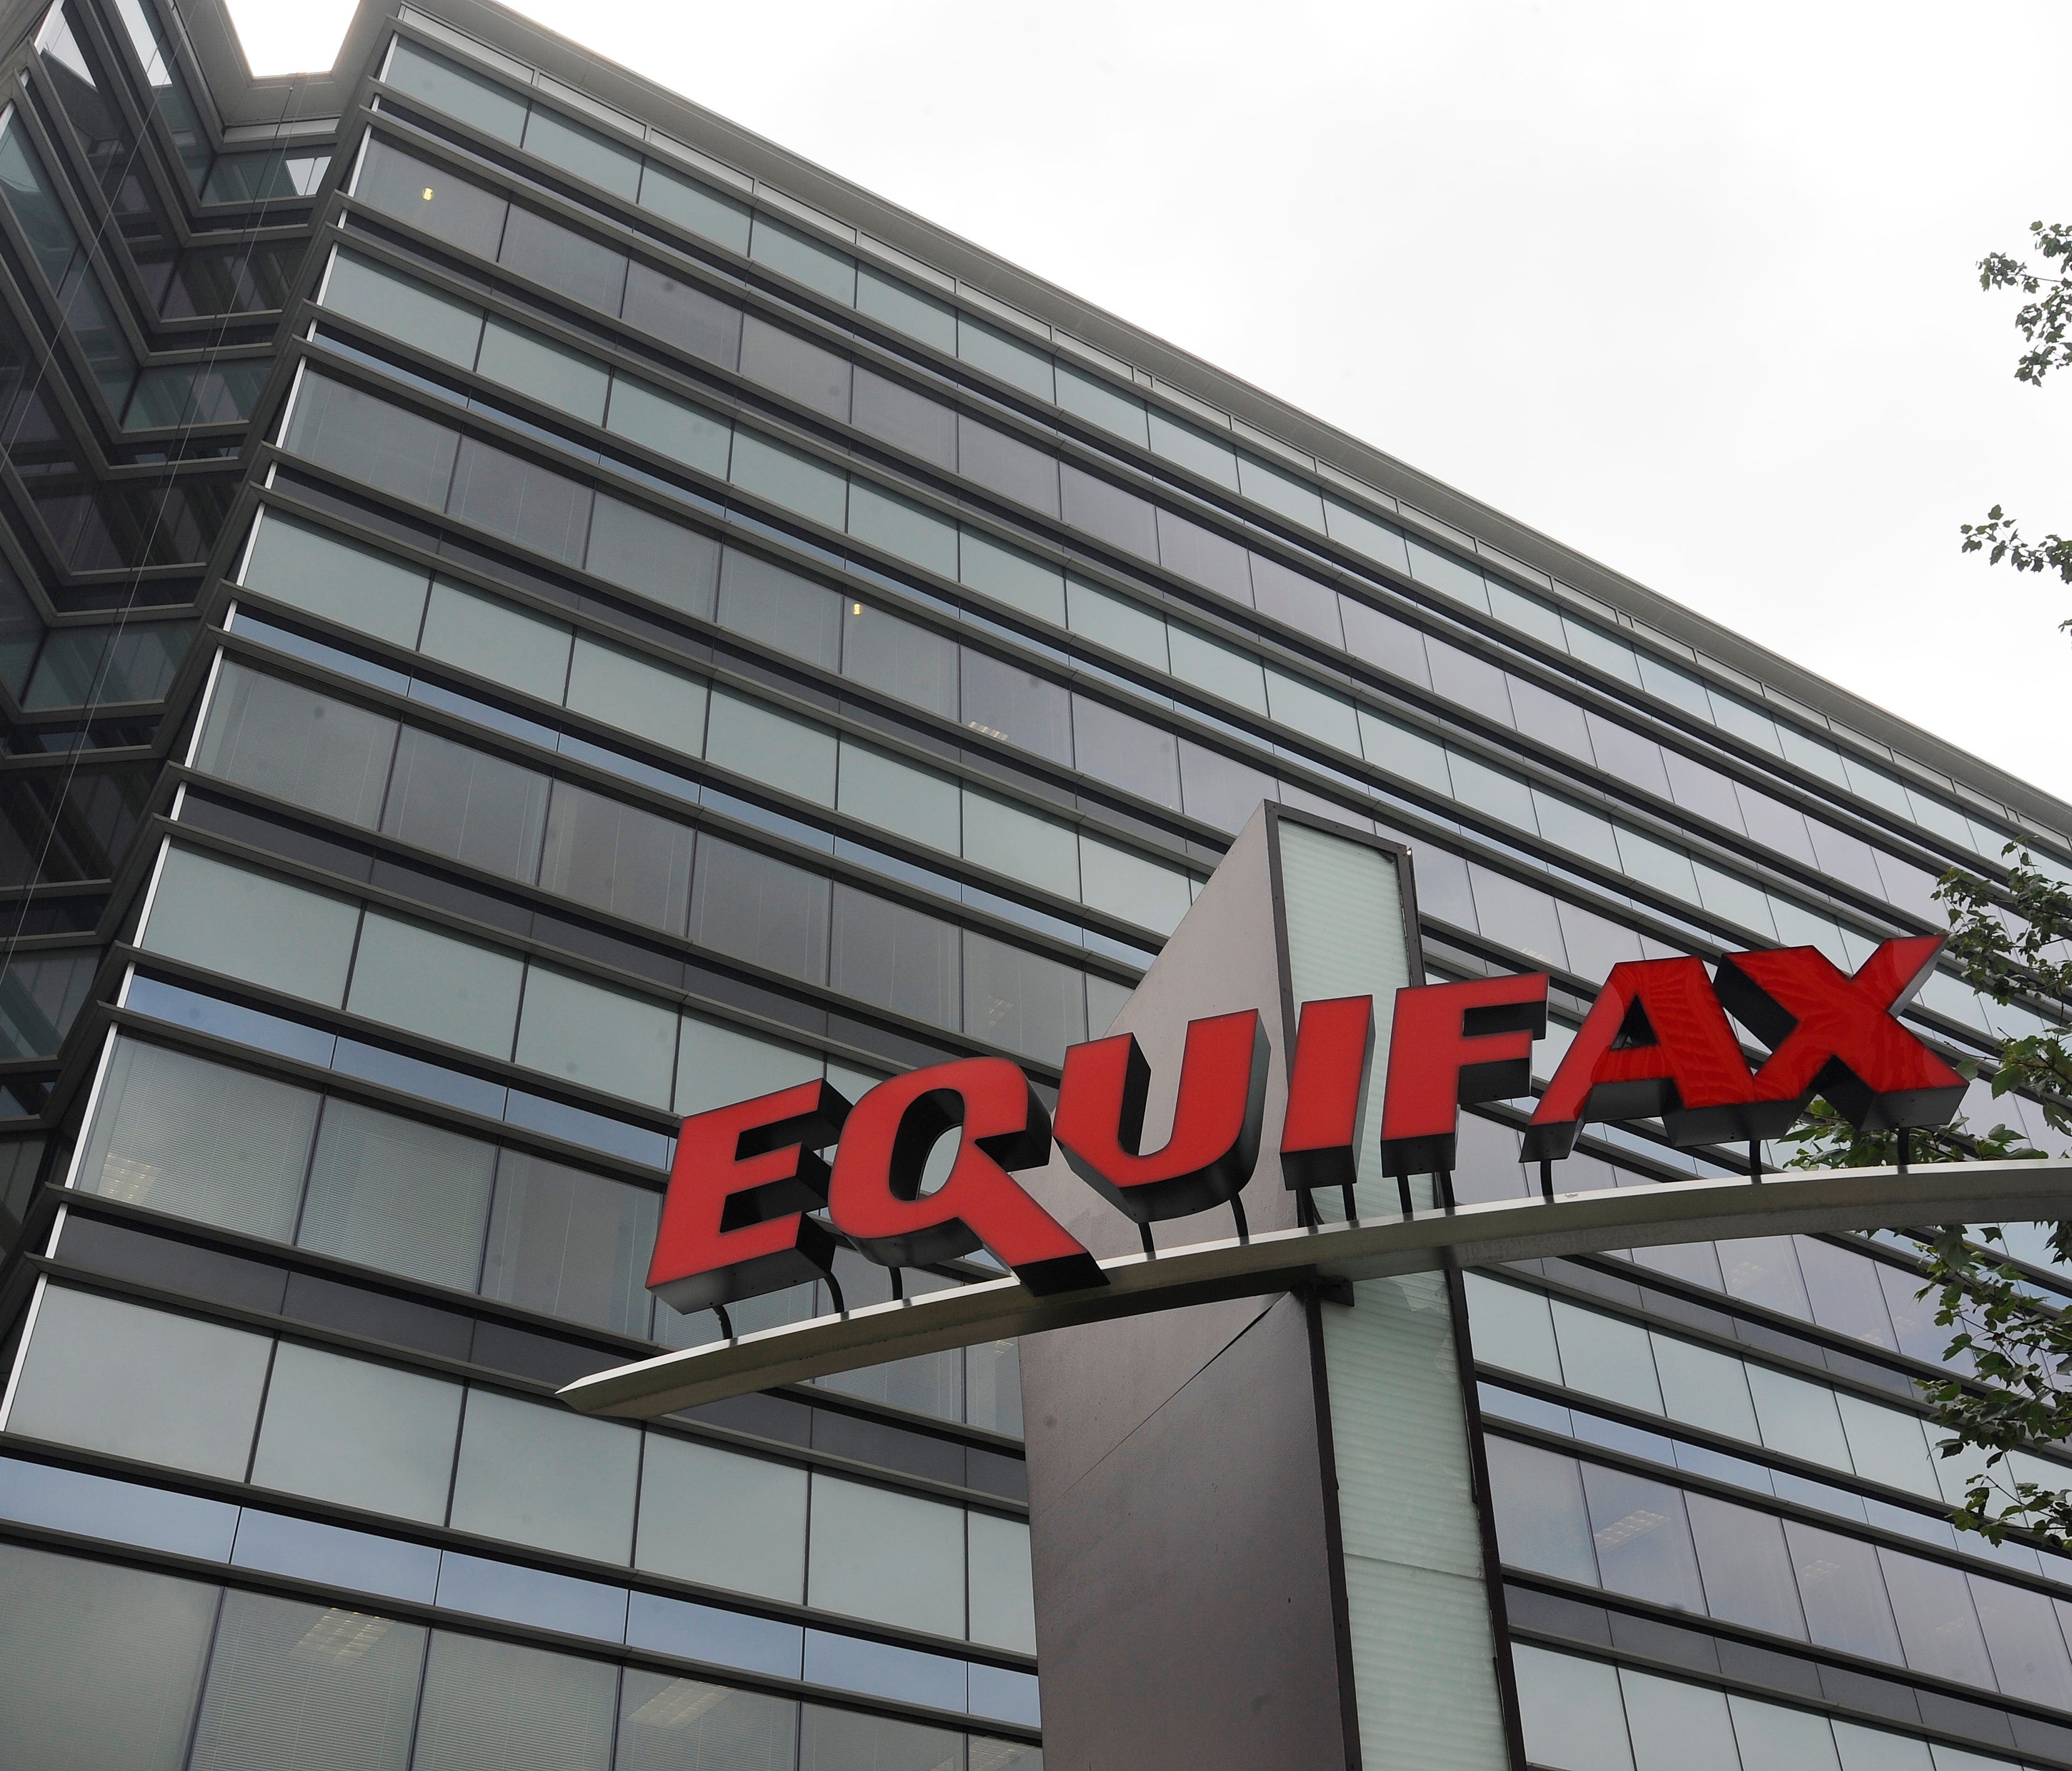 File photo taken in 2012 shows the Georgia headquarters of credit reporting and monitoring giant Equifax.